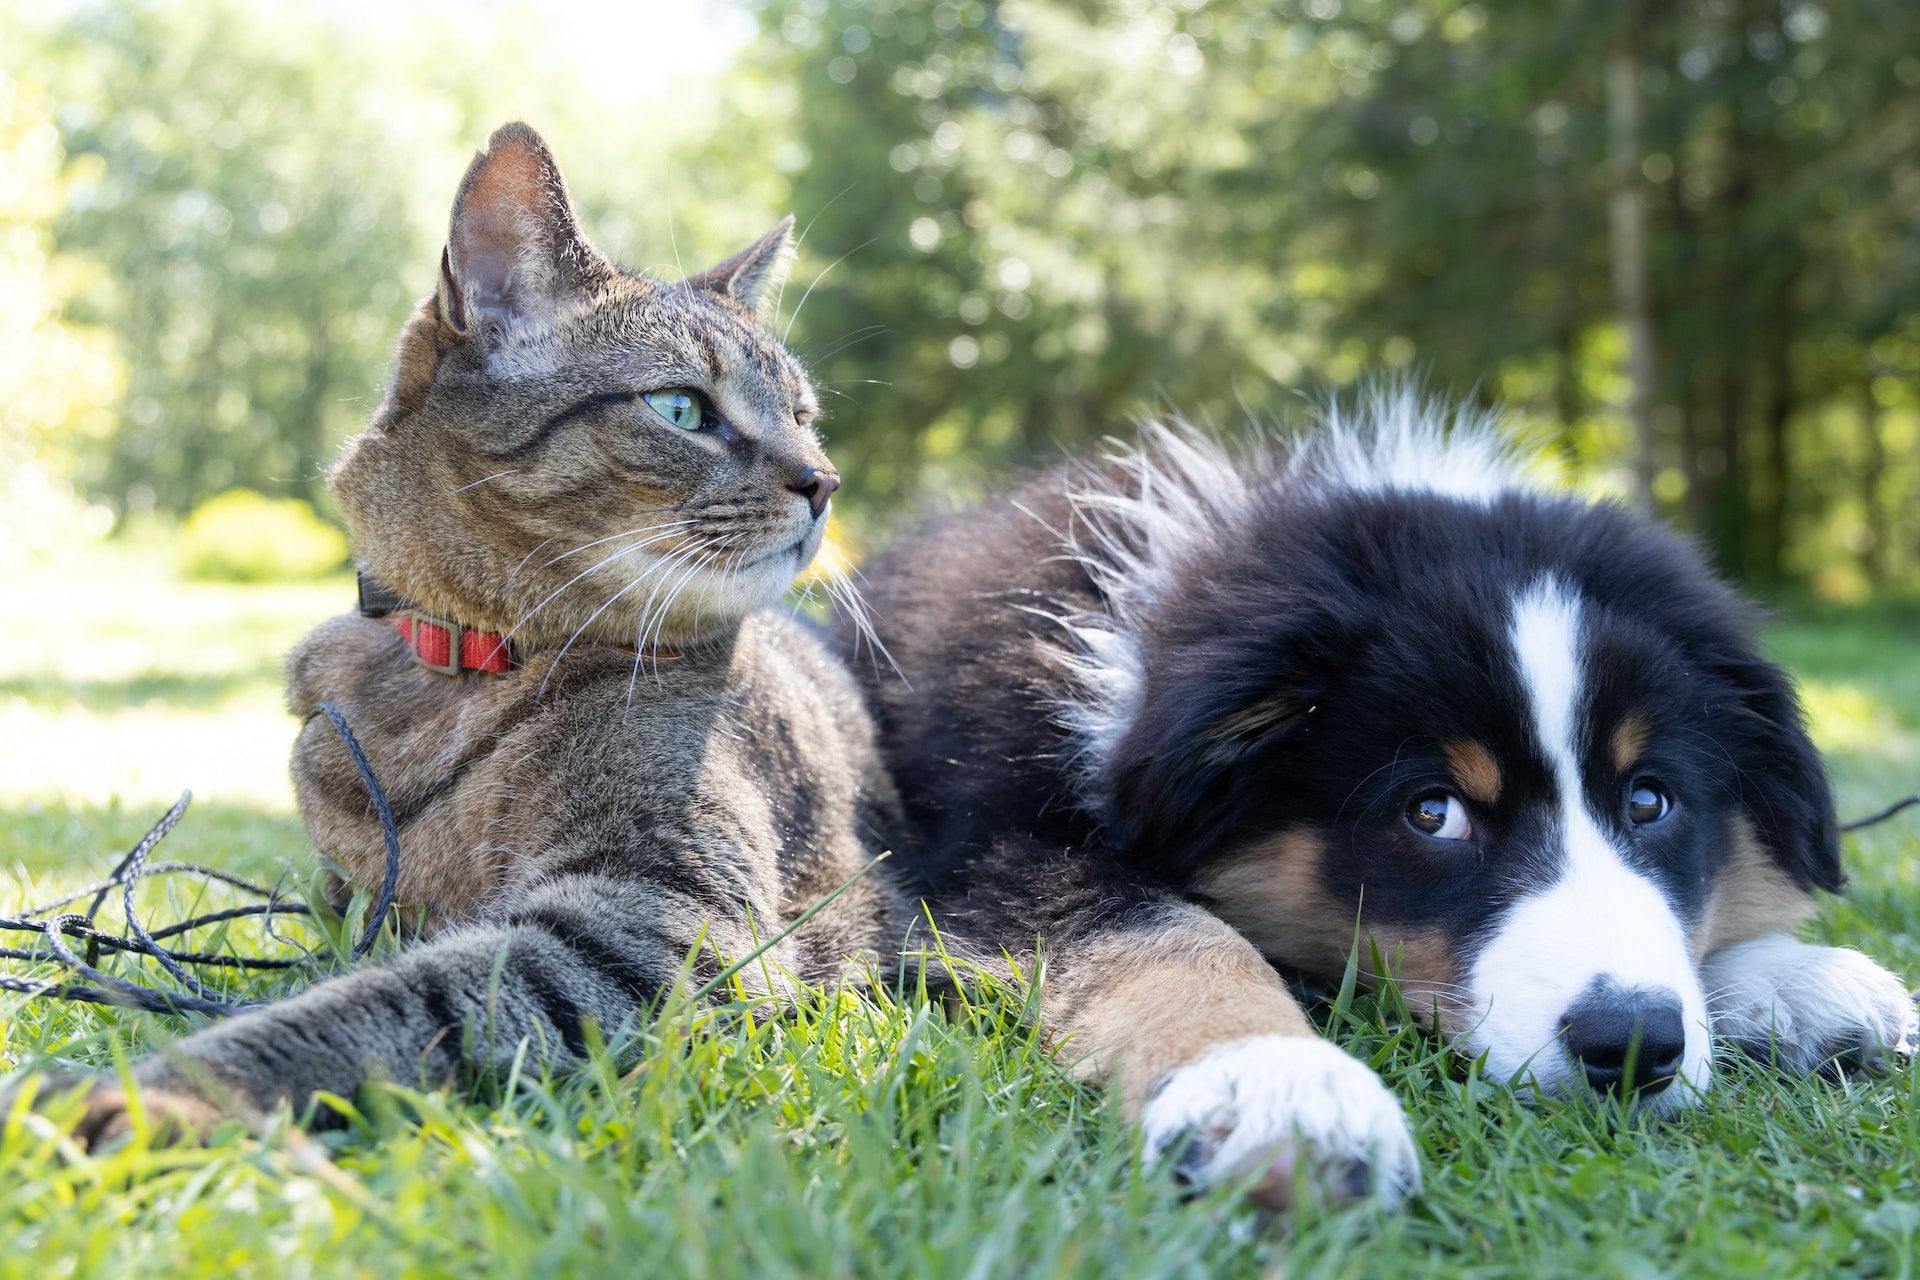 Cat and dog lying together on grass outdoors